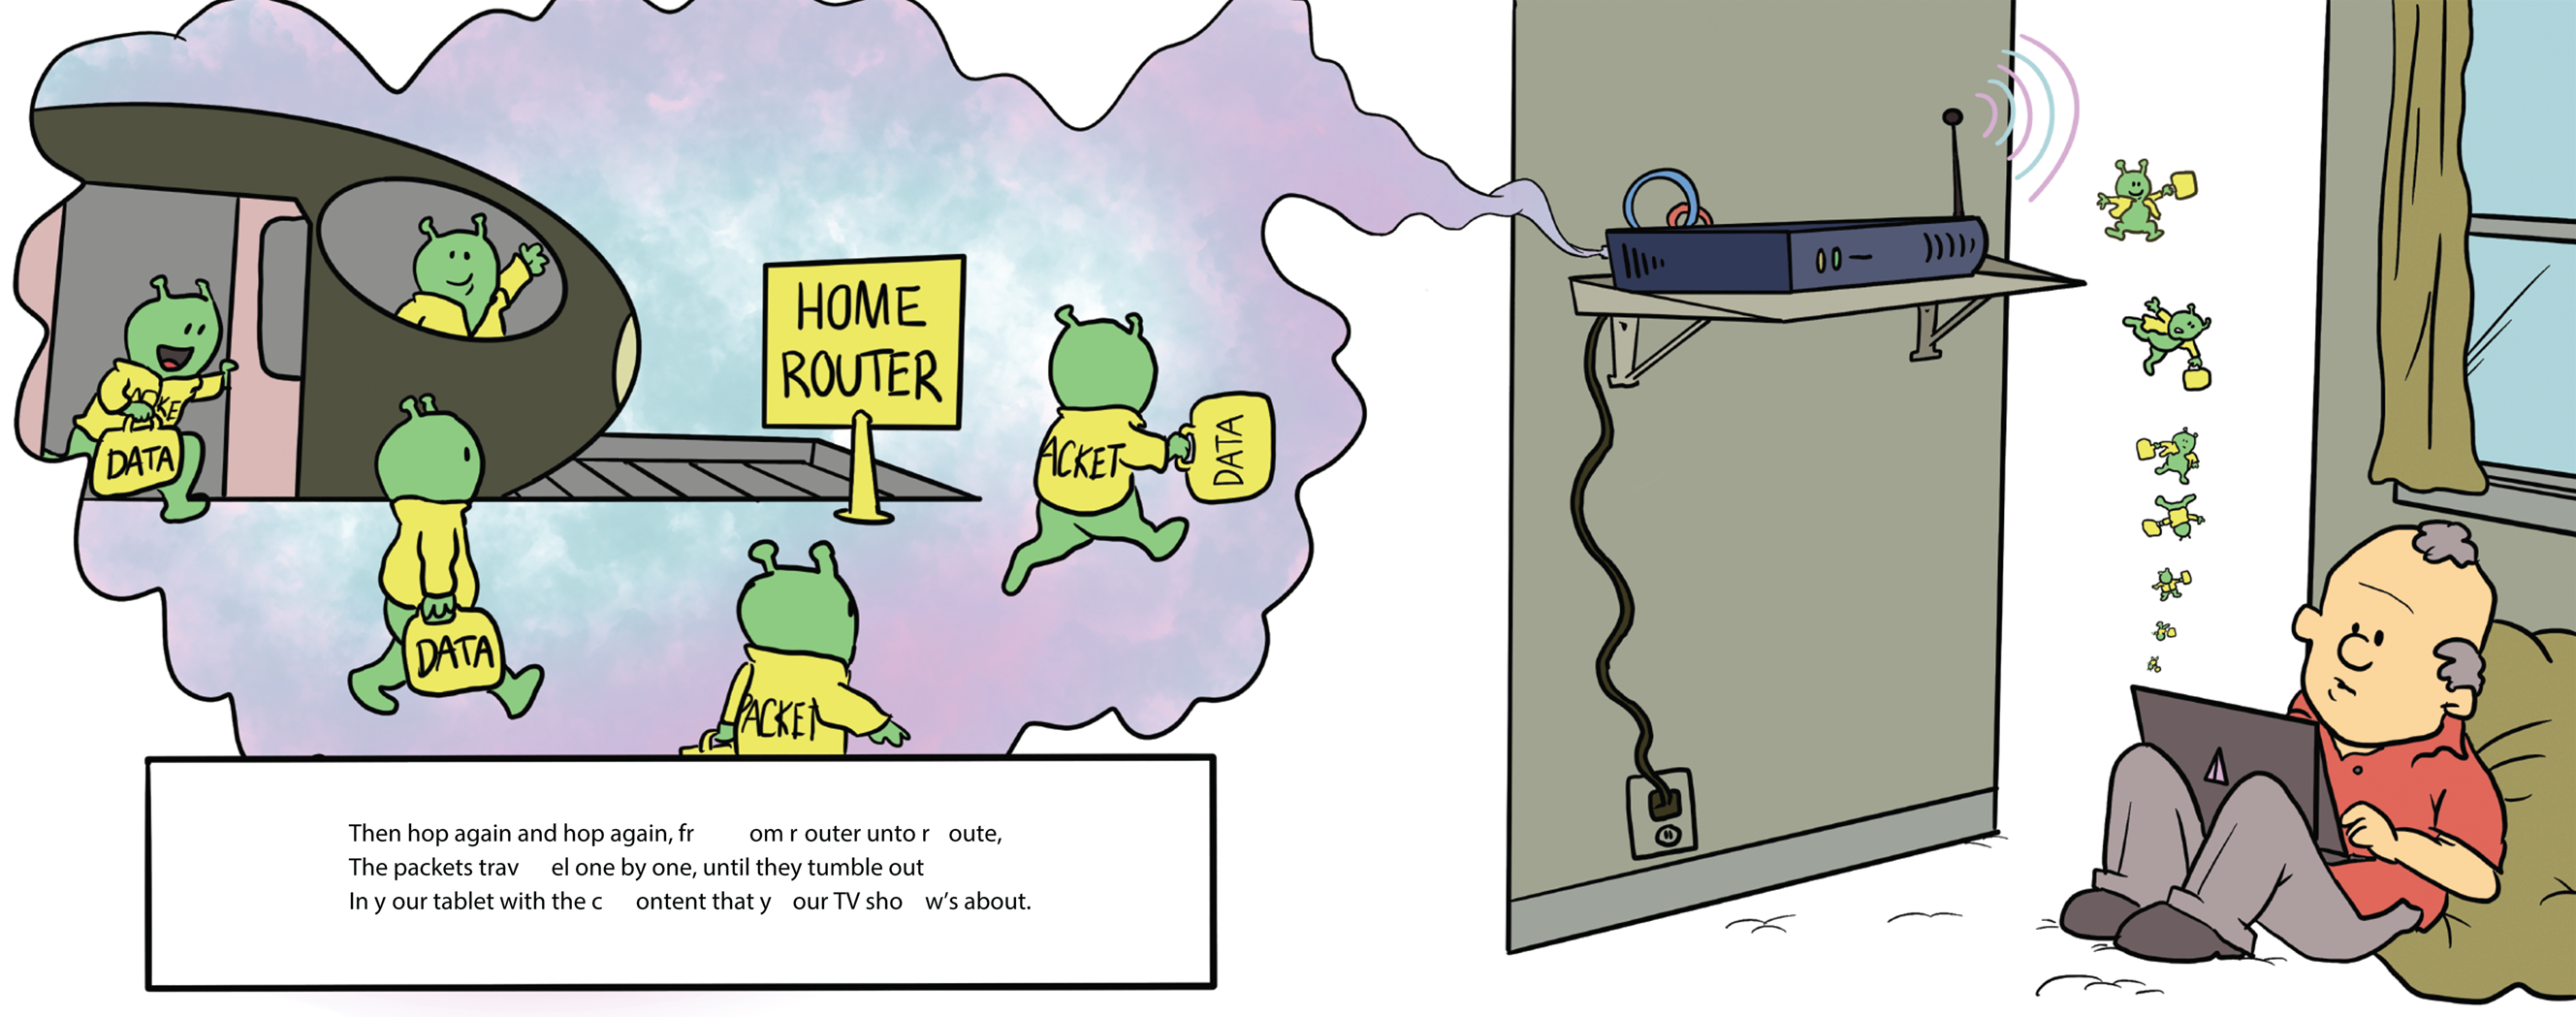 Cartoon illustration of the packets being delivered to the home router.